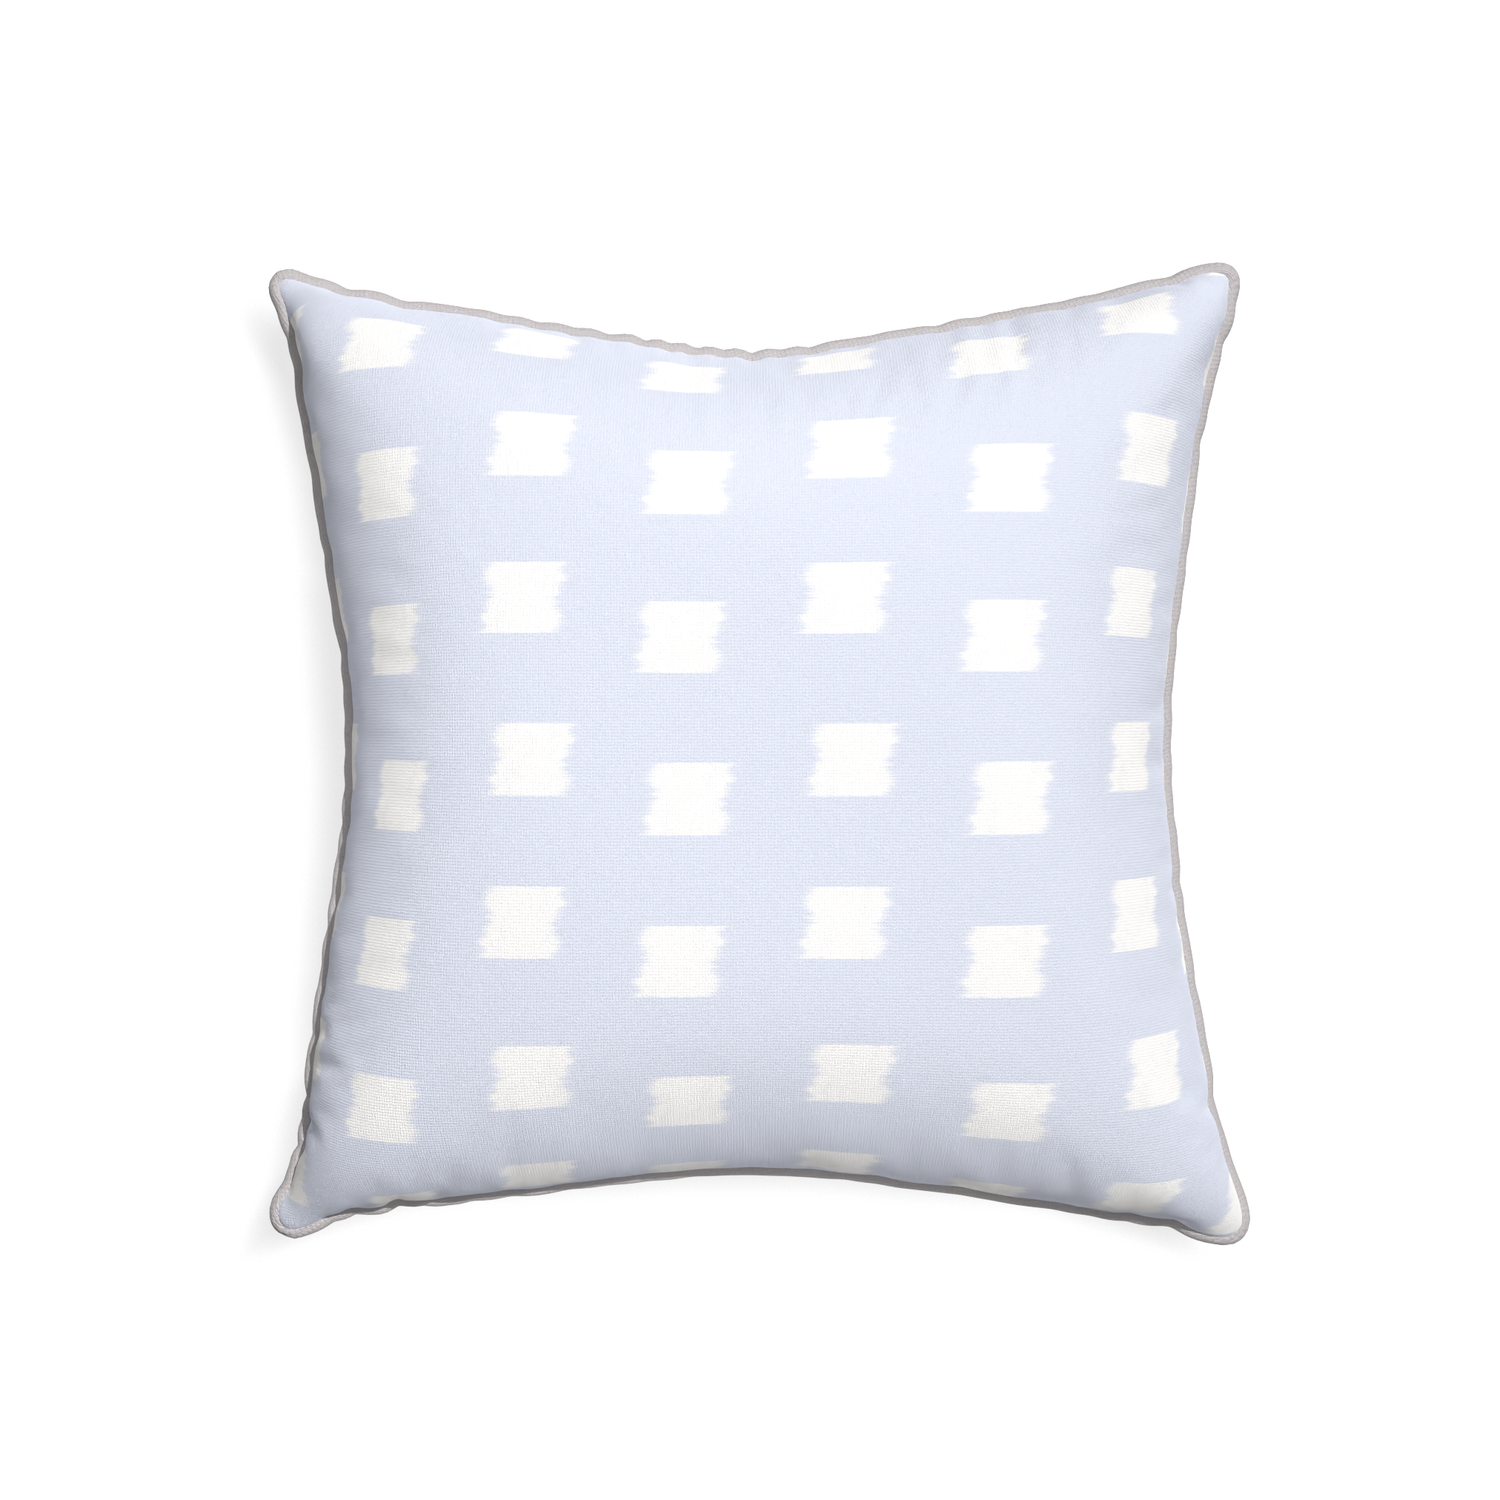 22-square denton custom sky blue patternpillow with pebble piping on white background